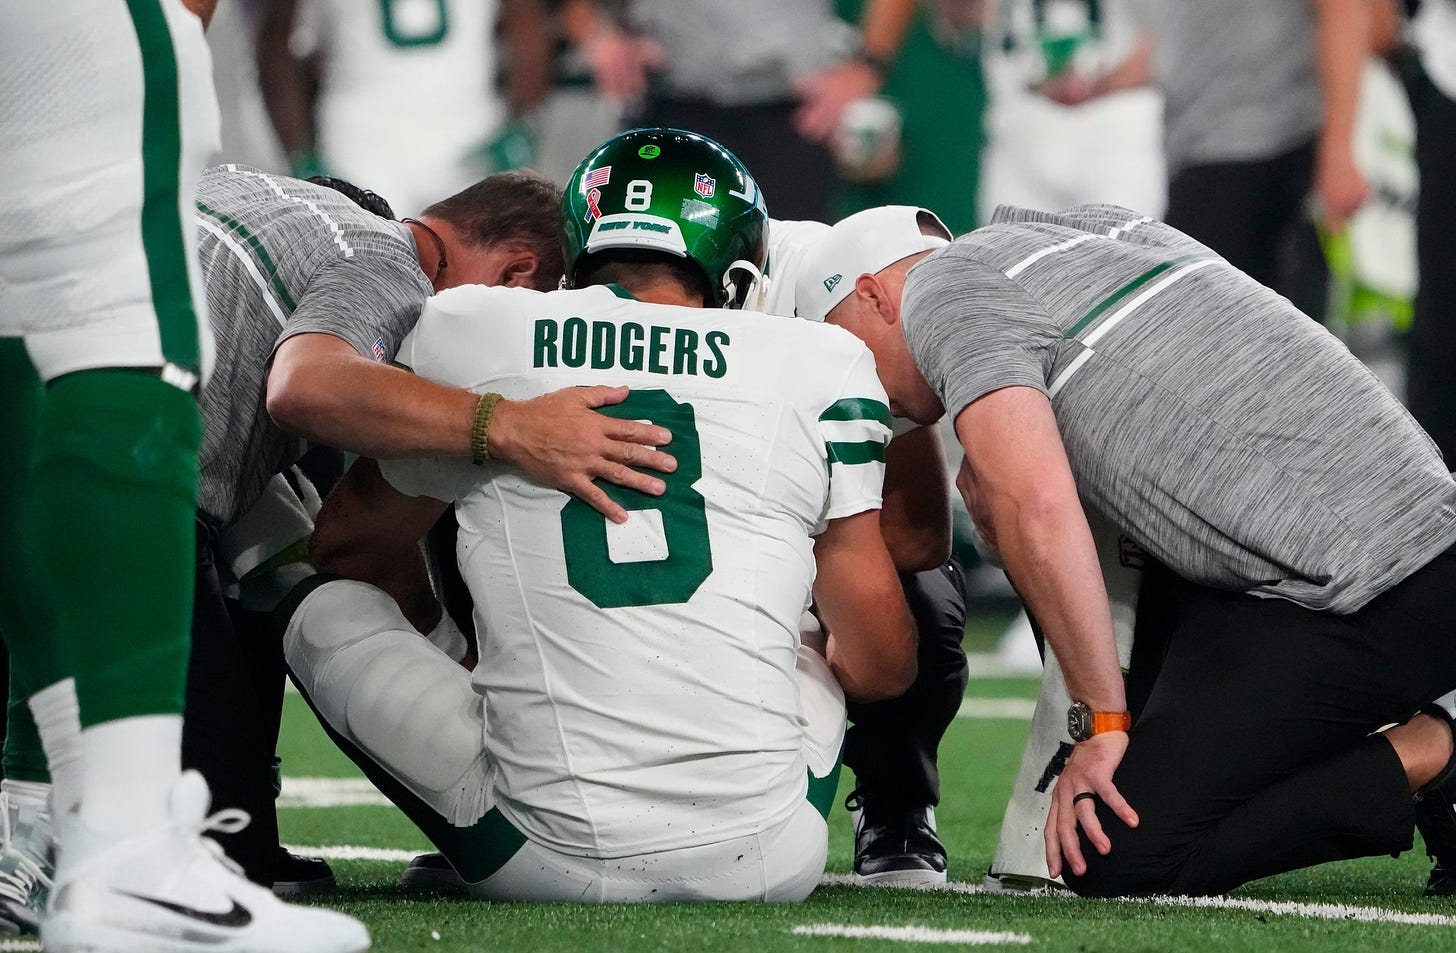 New York Jets’ Quarterback Aaron Rodgers Suffers Potential Season-Ending ACL Injury